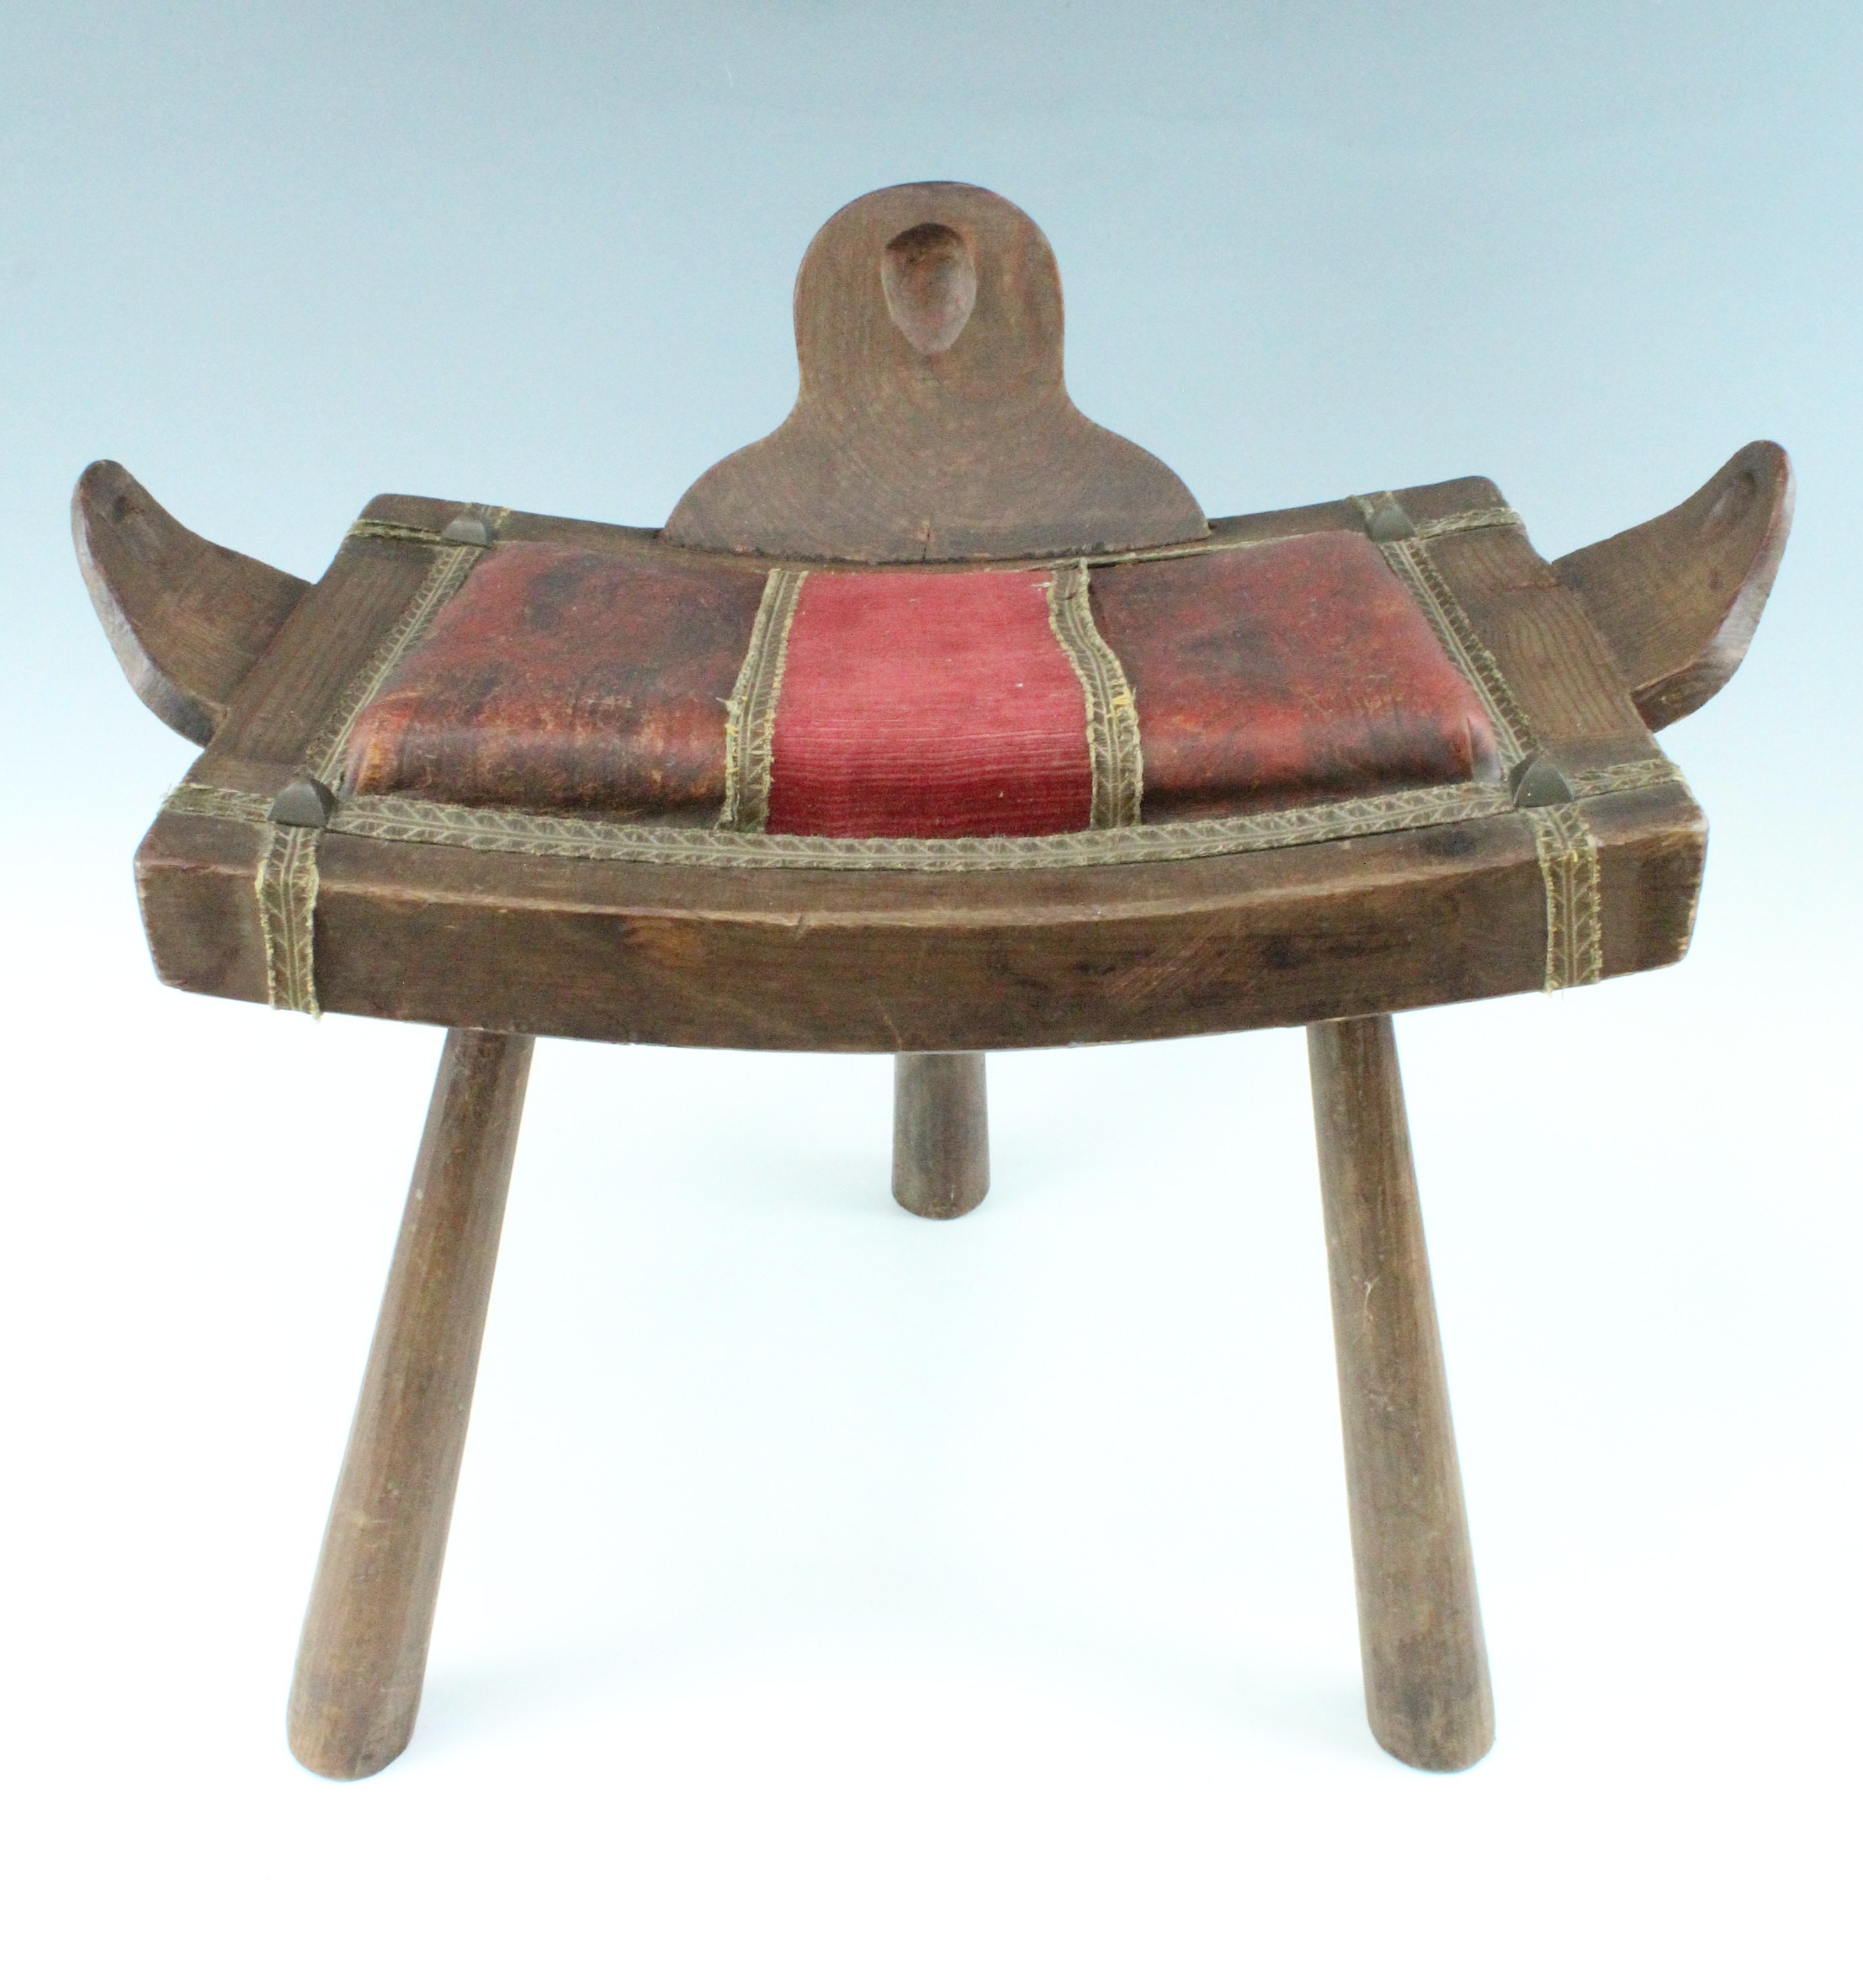 An early-to-mid 20th Century Middle Eastern style upholstered pine stool, 61 cm x 35 cm x 41 cm